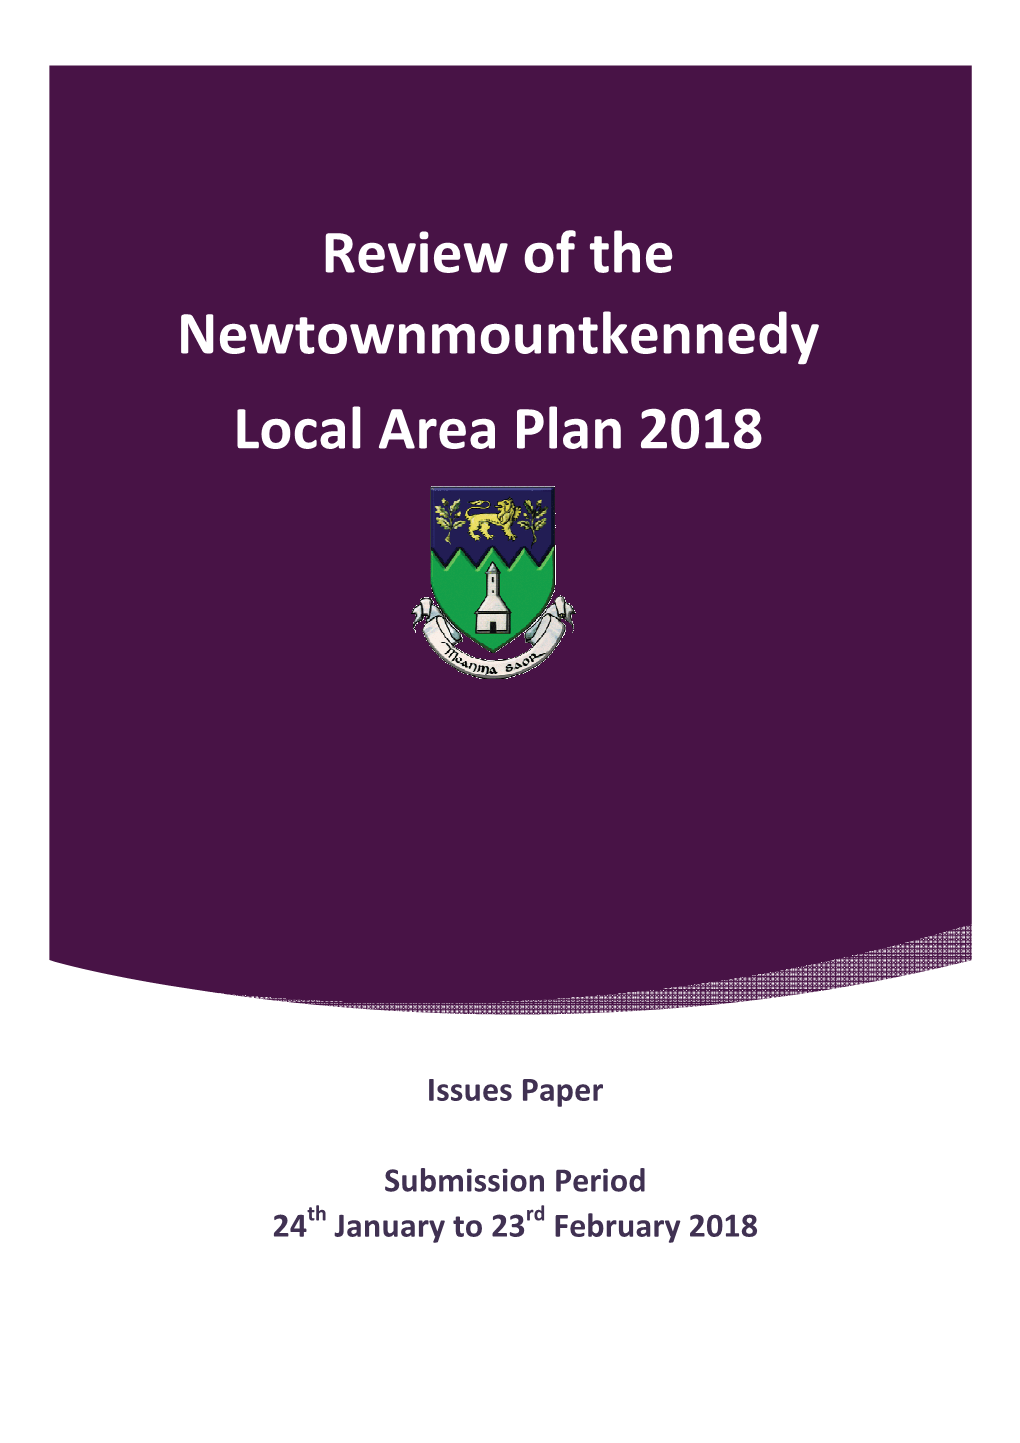 Review of the Newtownmountkennedy Local Area Plan 2018